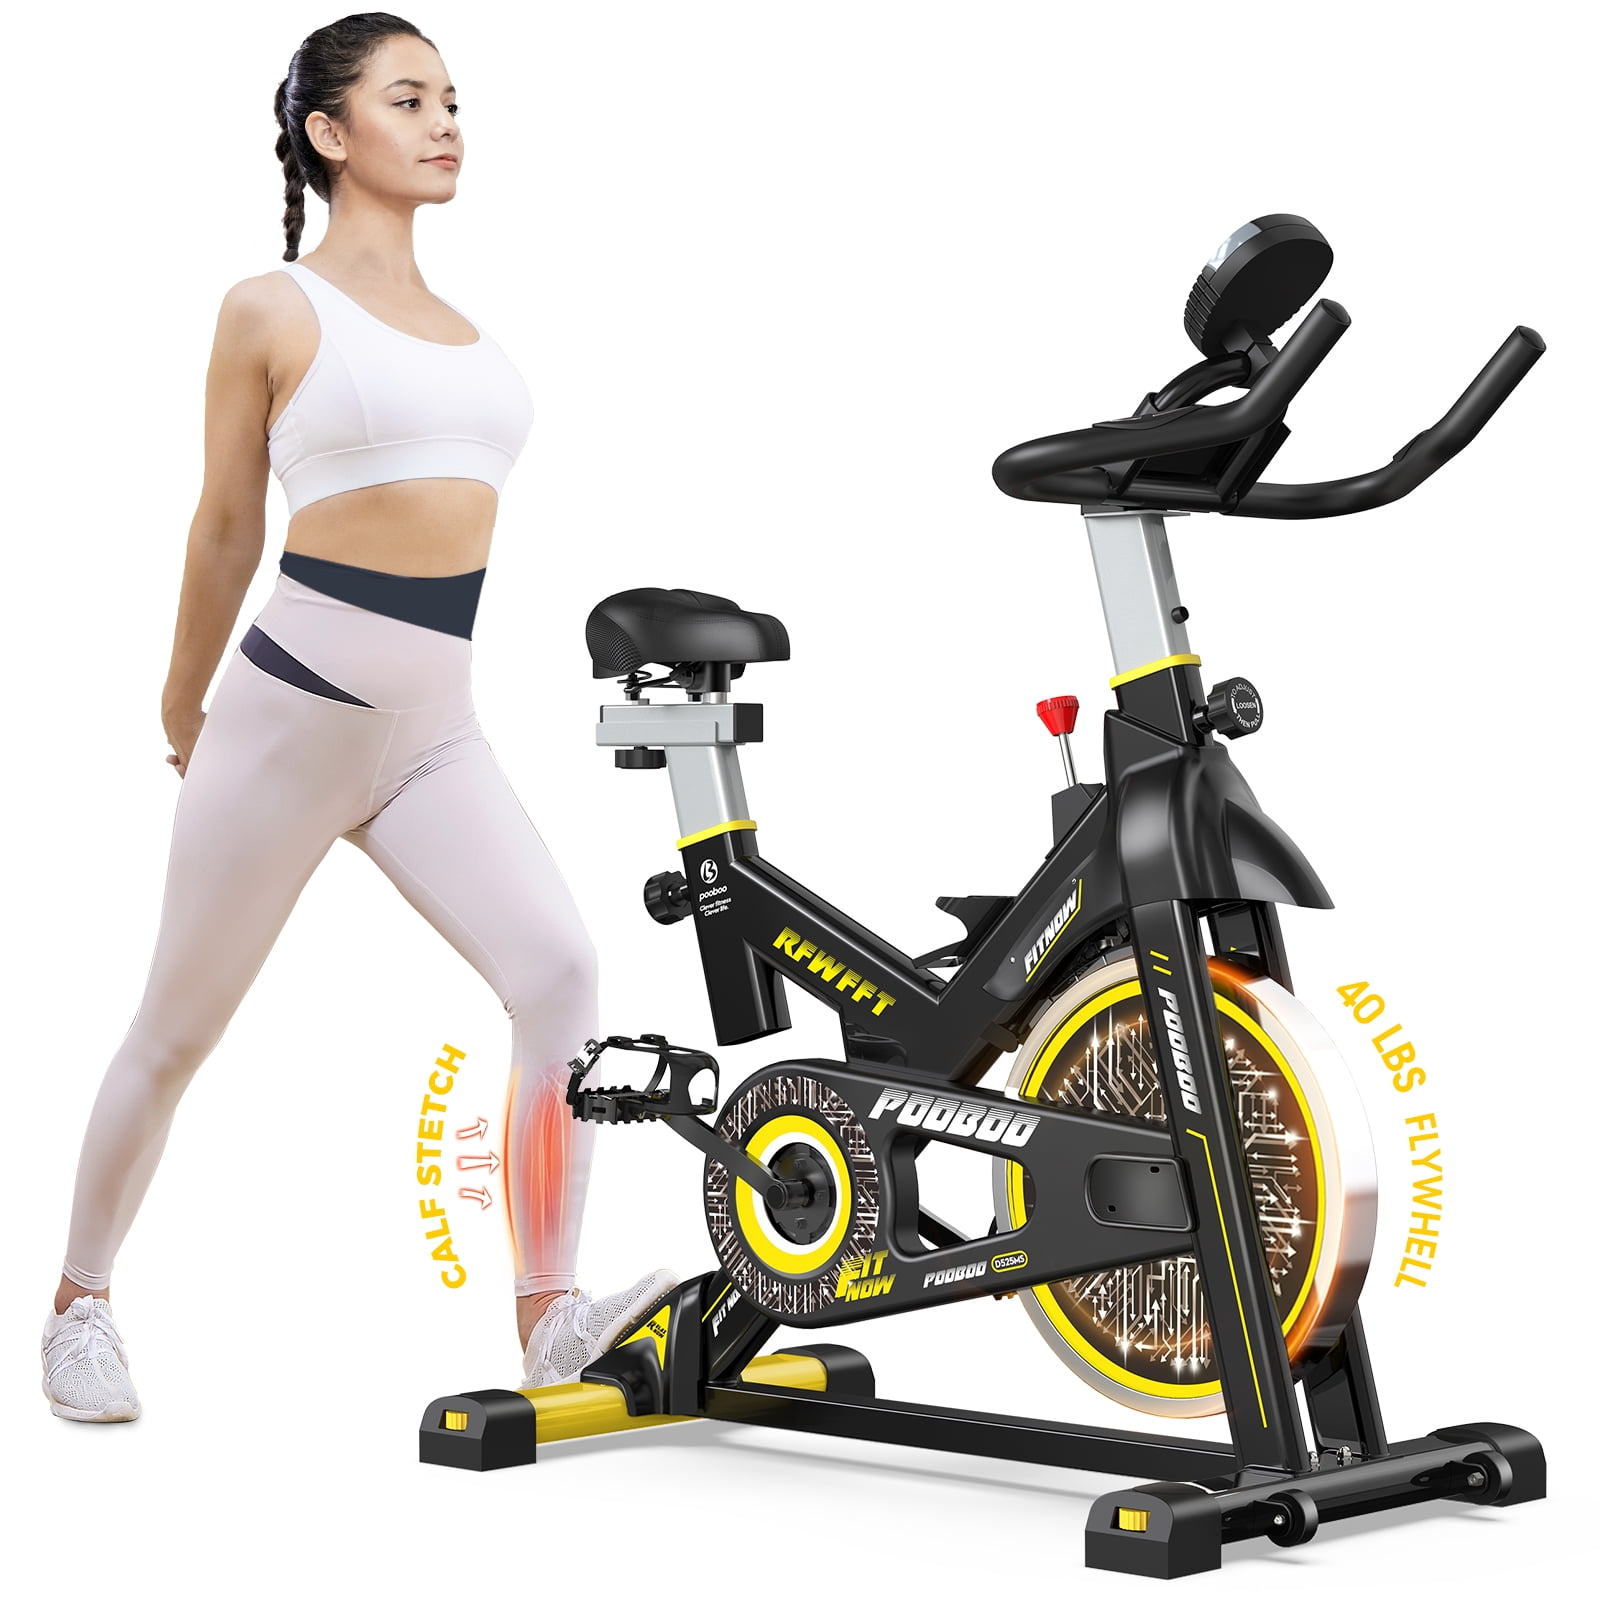 300 lbs Capacity Quiet Stable Bike with Digital Monitor Phone Holder Great Gift Idea for Parents! Pooboo Recumbent Exercise Bike Magnetic for Adults Seniors Adjustable Seat & Resistance Indoor Cycling Stationary Fitness Equipment for Home Workout 